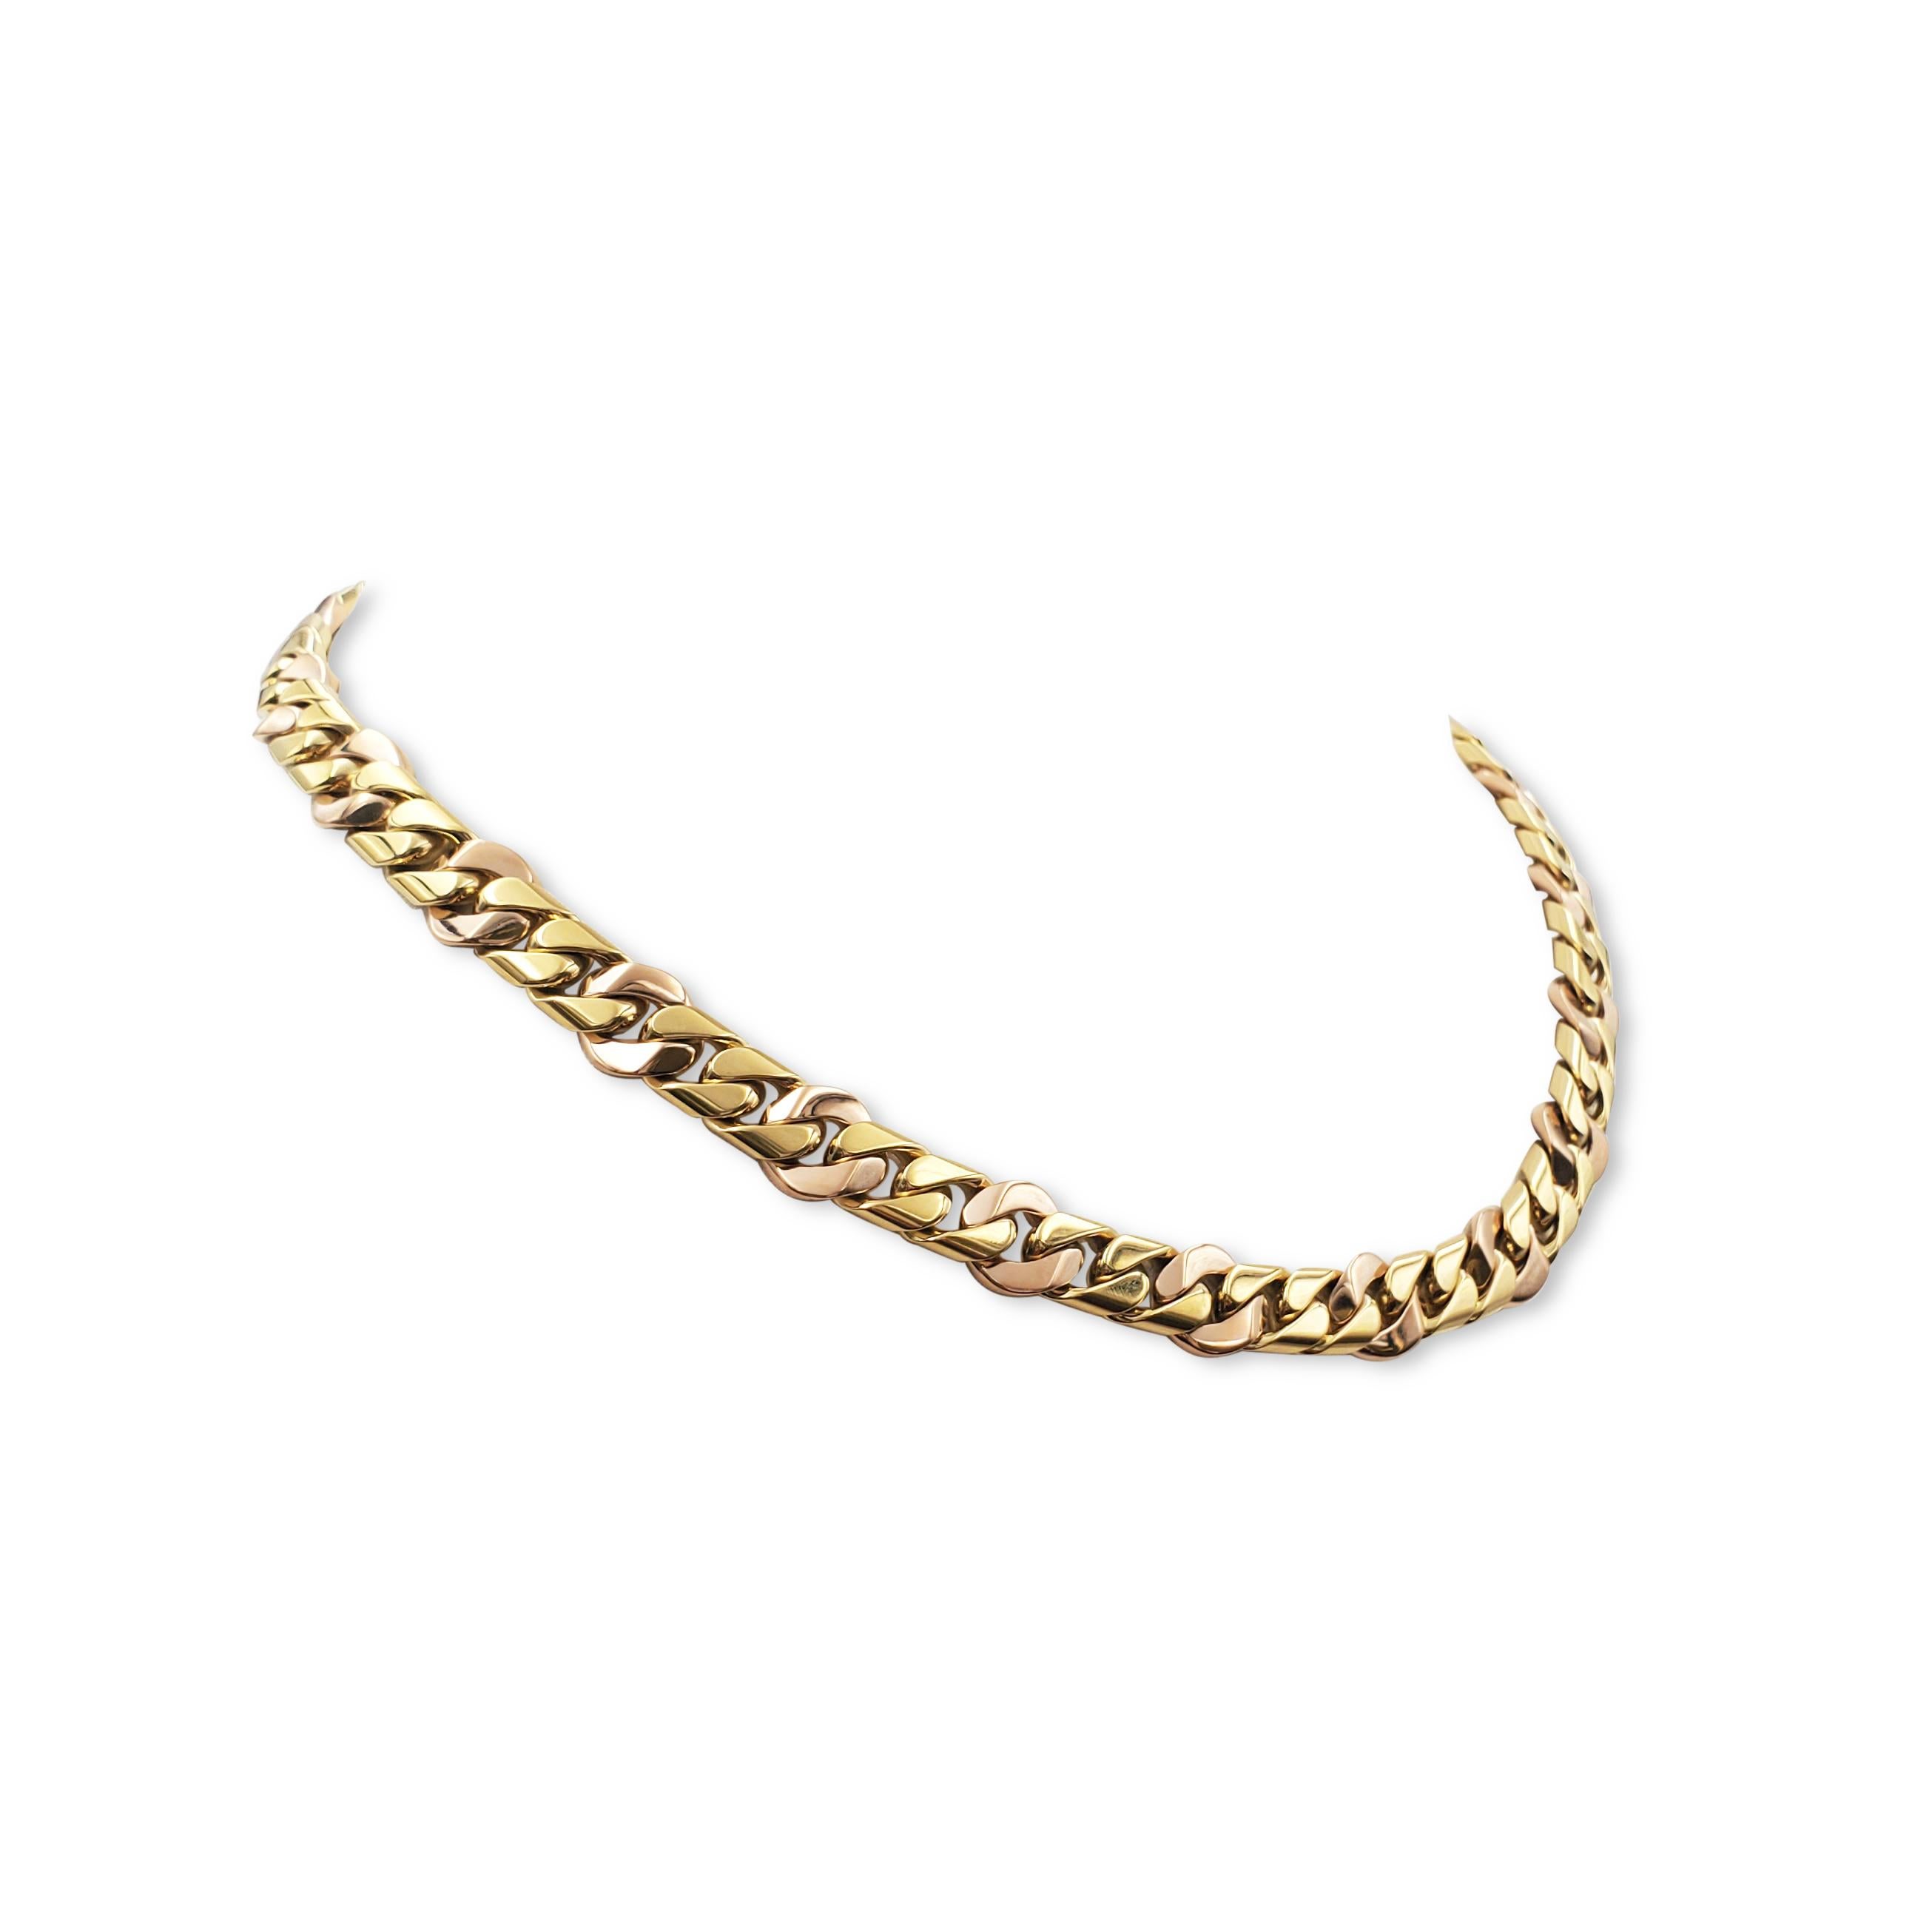 Bvlgari Two-Tone Gold Curb Link Necklace In Excellent Condition For Sale In New York, NY